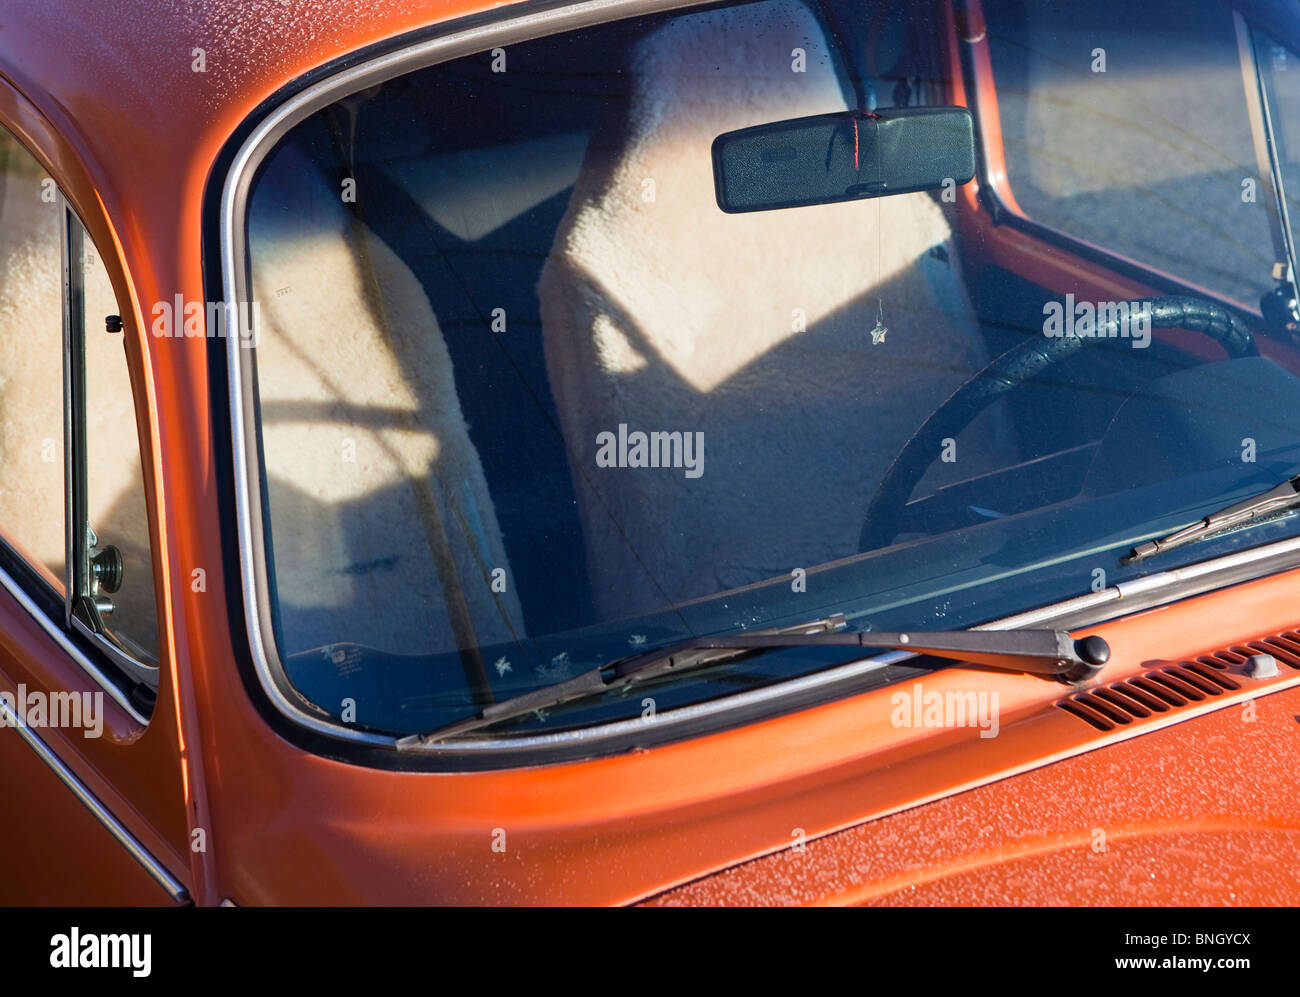 Close-up of a Volkswagen Beetle car, Seattle, Washington State, USA Stock Photo